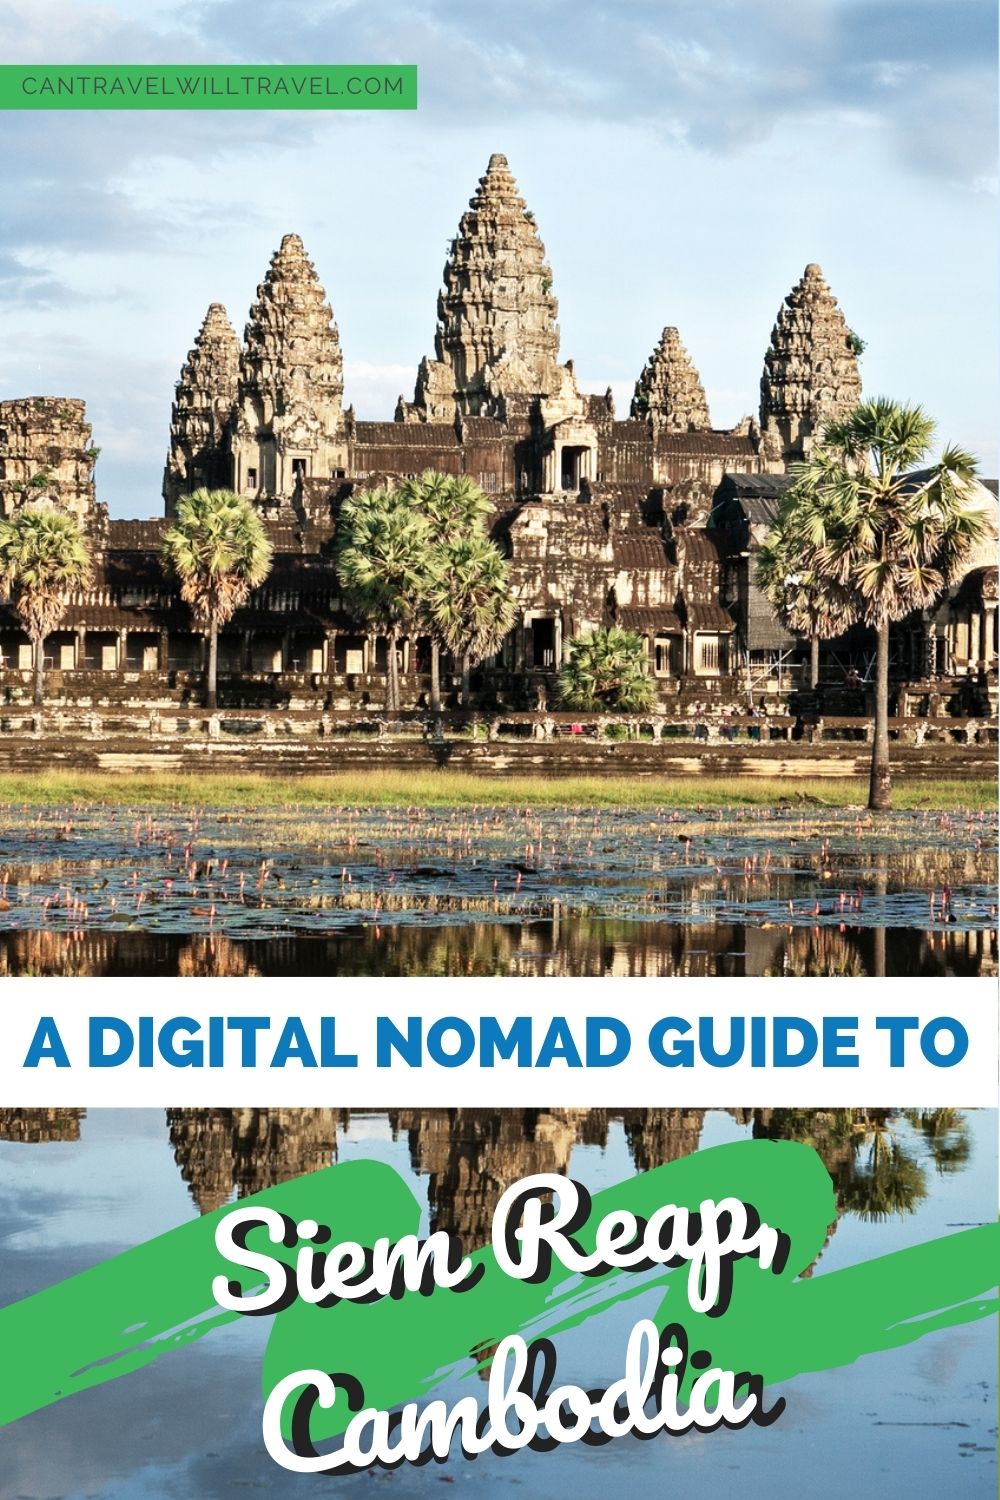 A Digital Nomad Guide to Siem Reap, Cambodia